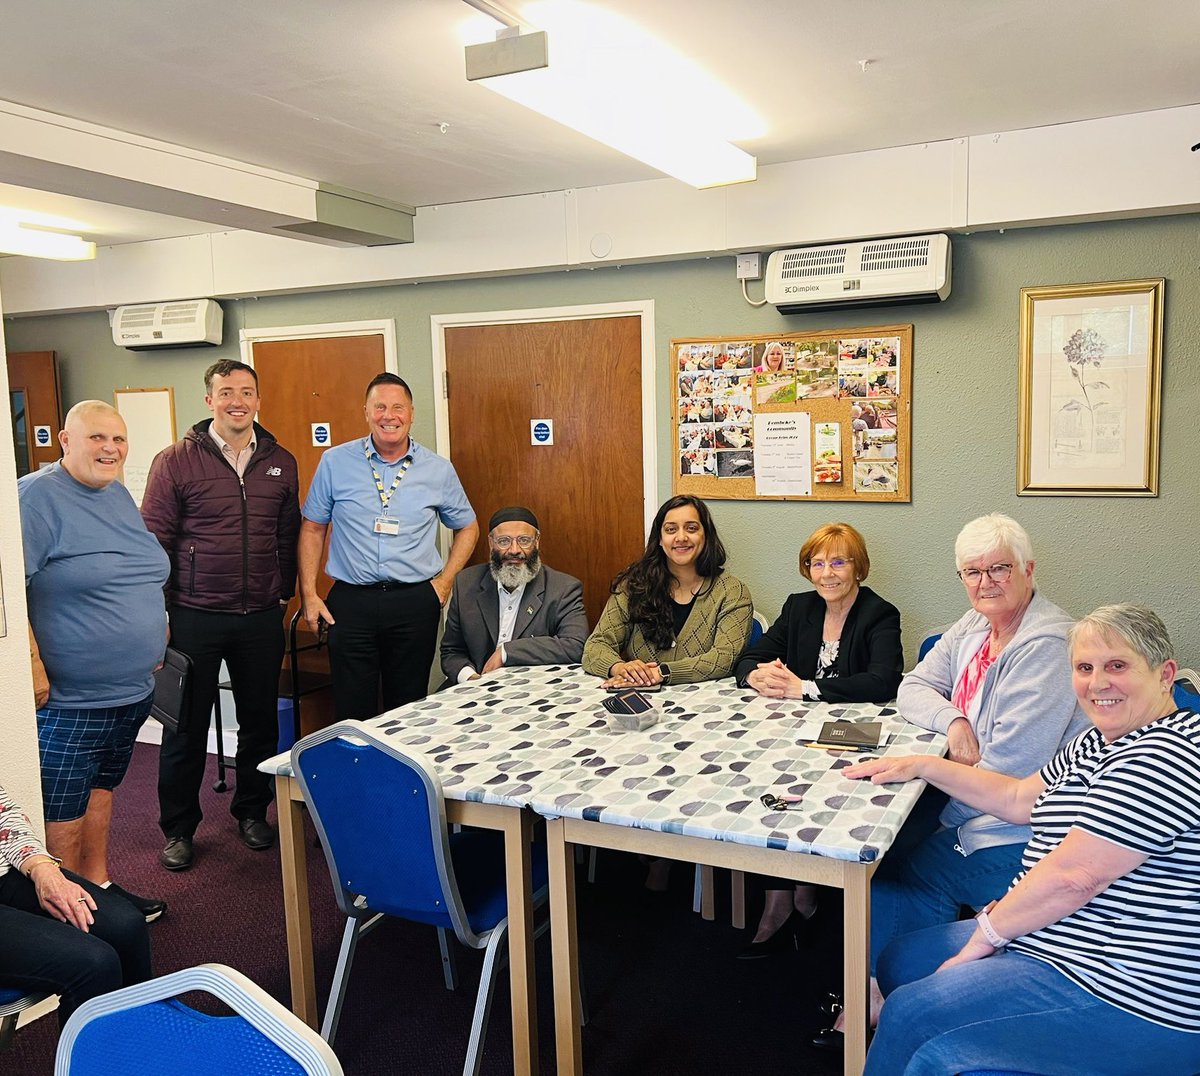 Local residents in Gipton had concerns regarding the cleaning service in their blocks. Cllrs arranged a productive meeting with the local housing manager and cleaning manager to listen to the issues. Overall a good conversation with solutions found to move forward.